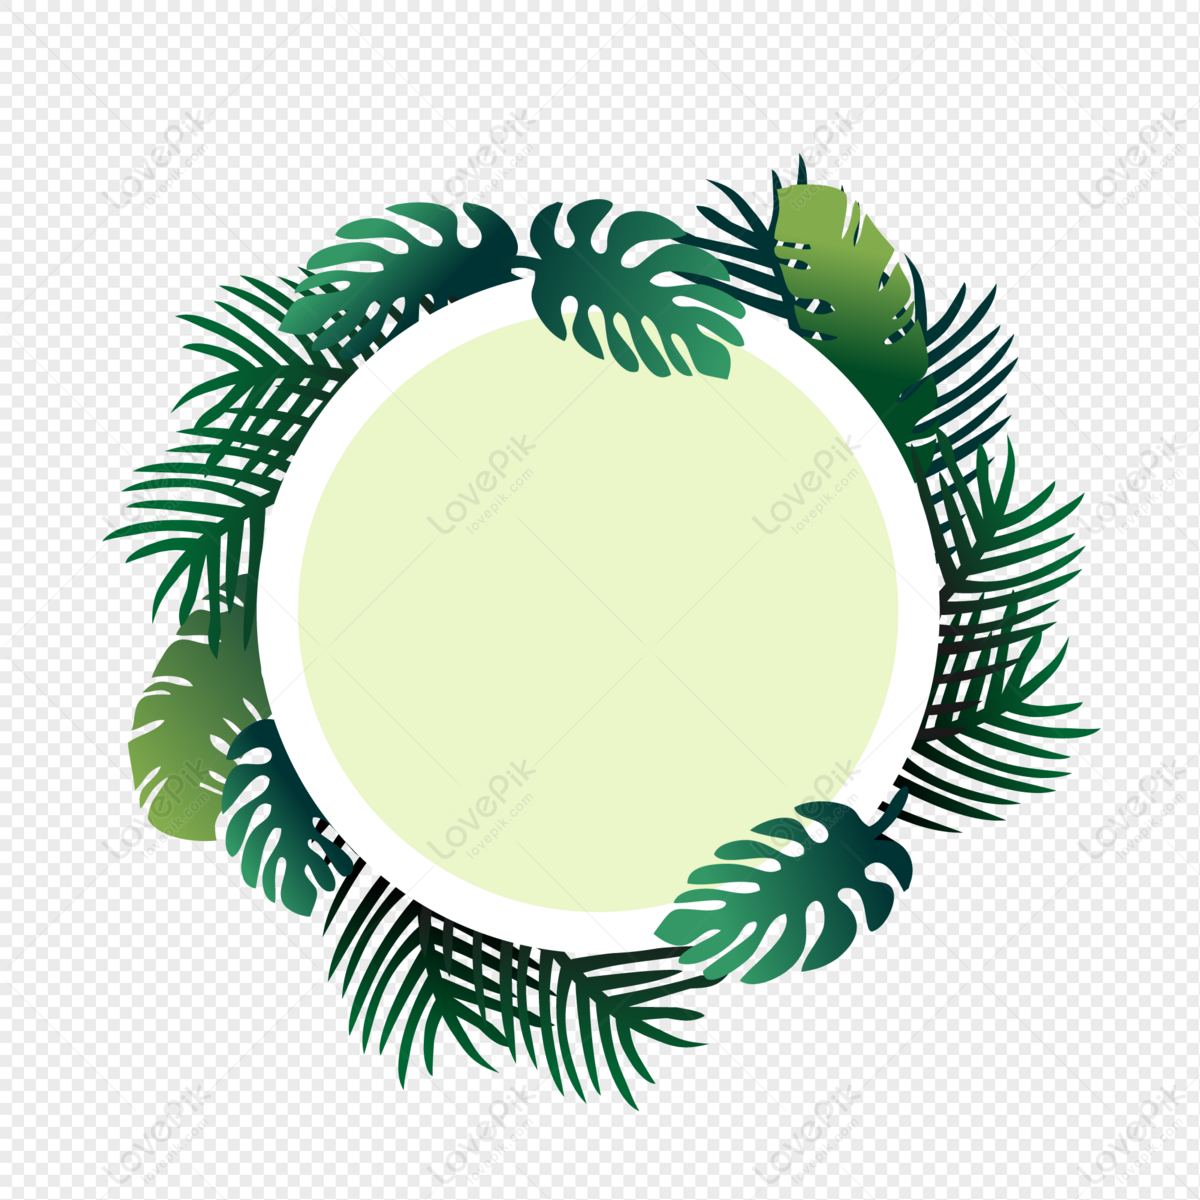 Cute Border Pattern Image PNG Picture And Clipart Image For Free ...